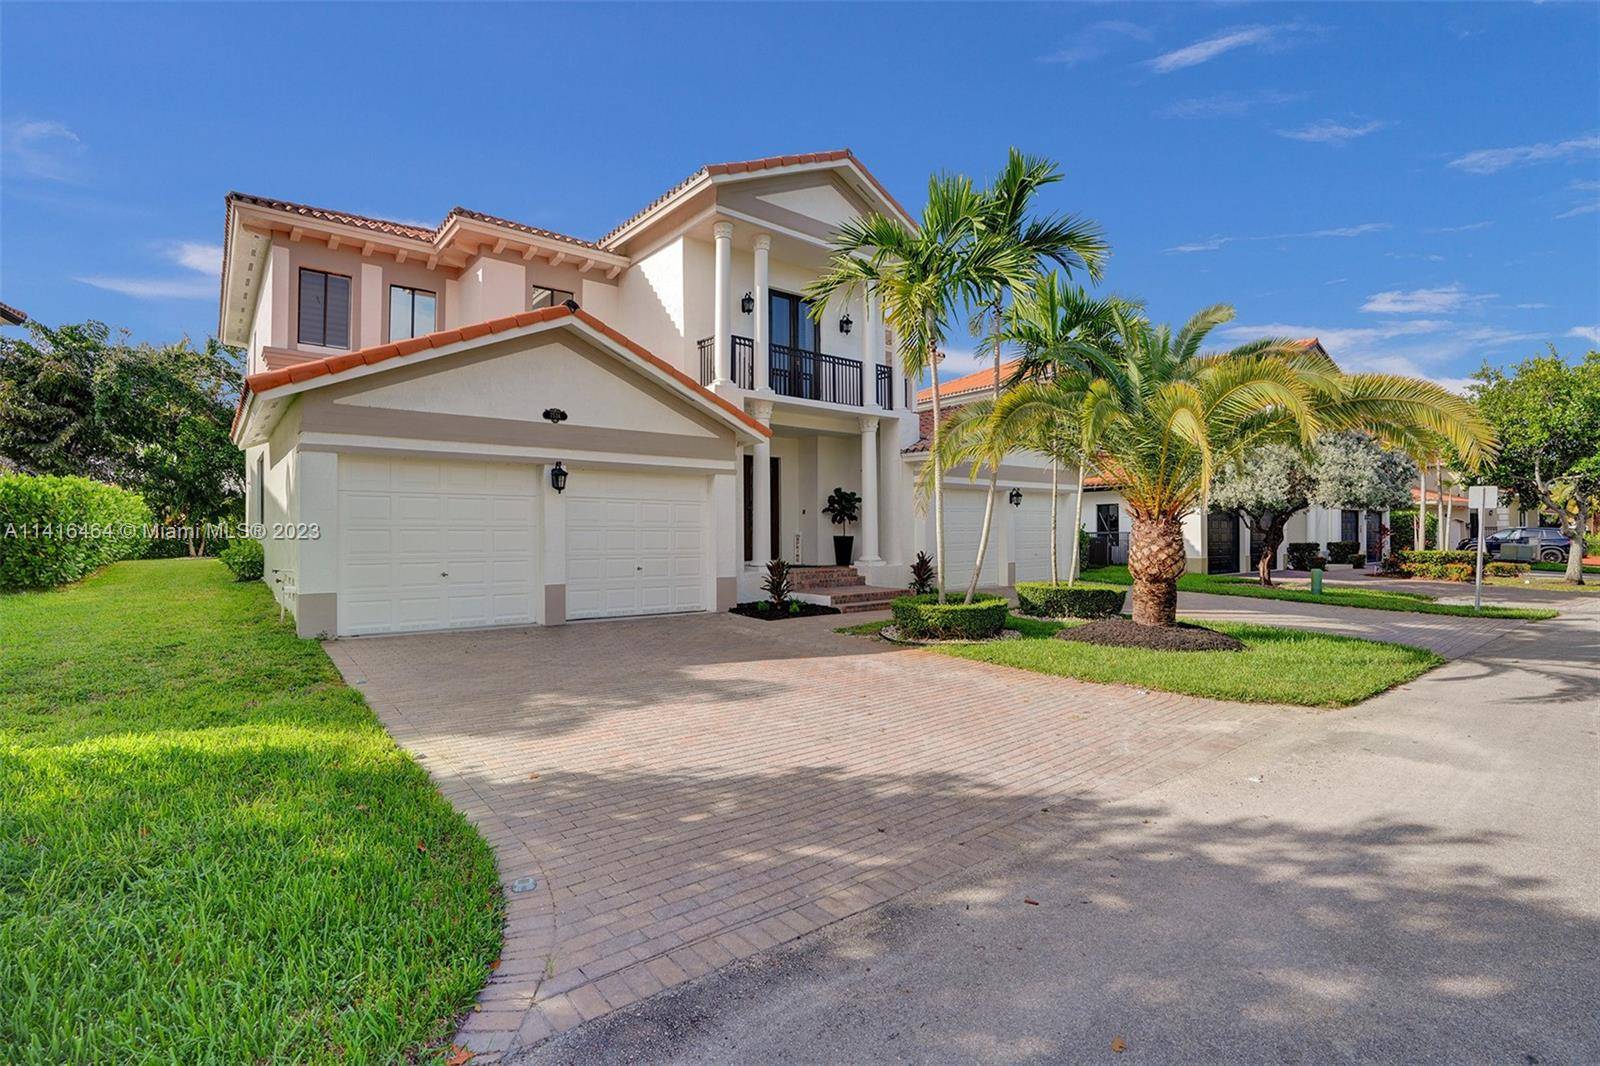 This stunning 2 story home is located in the prestigious guarded community of Cutler Cay.